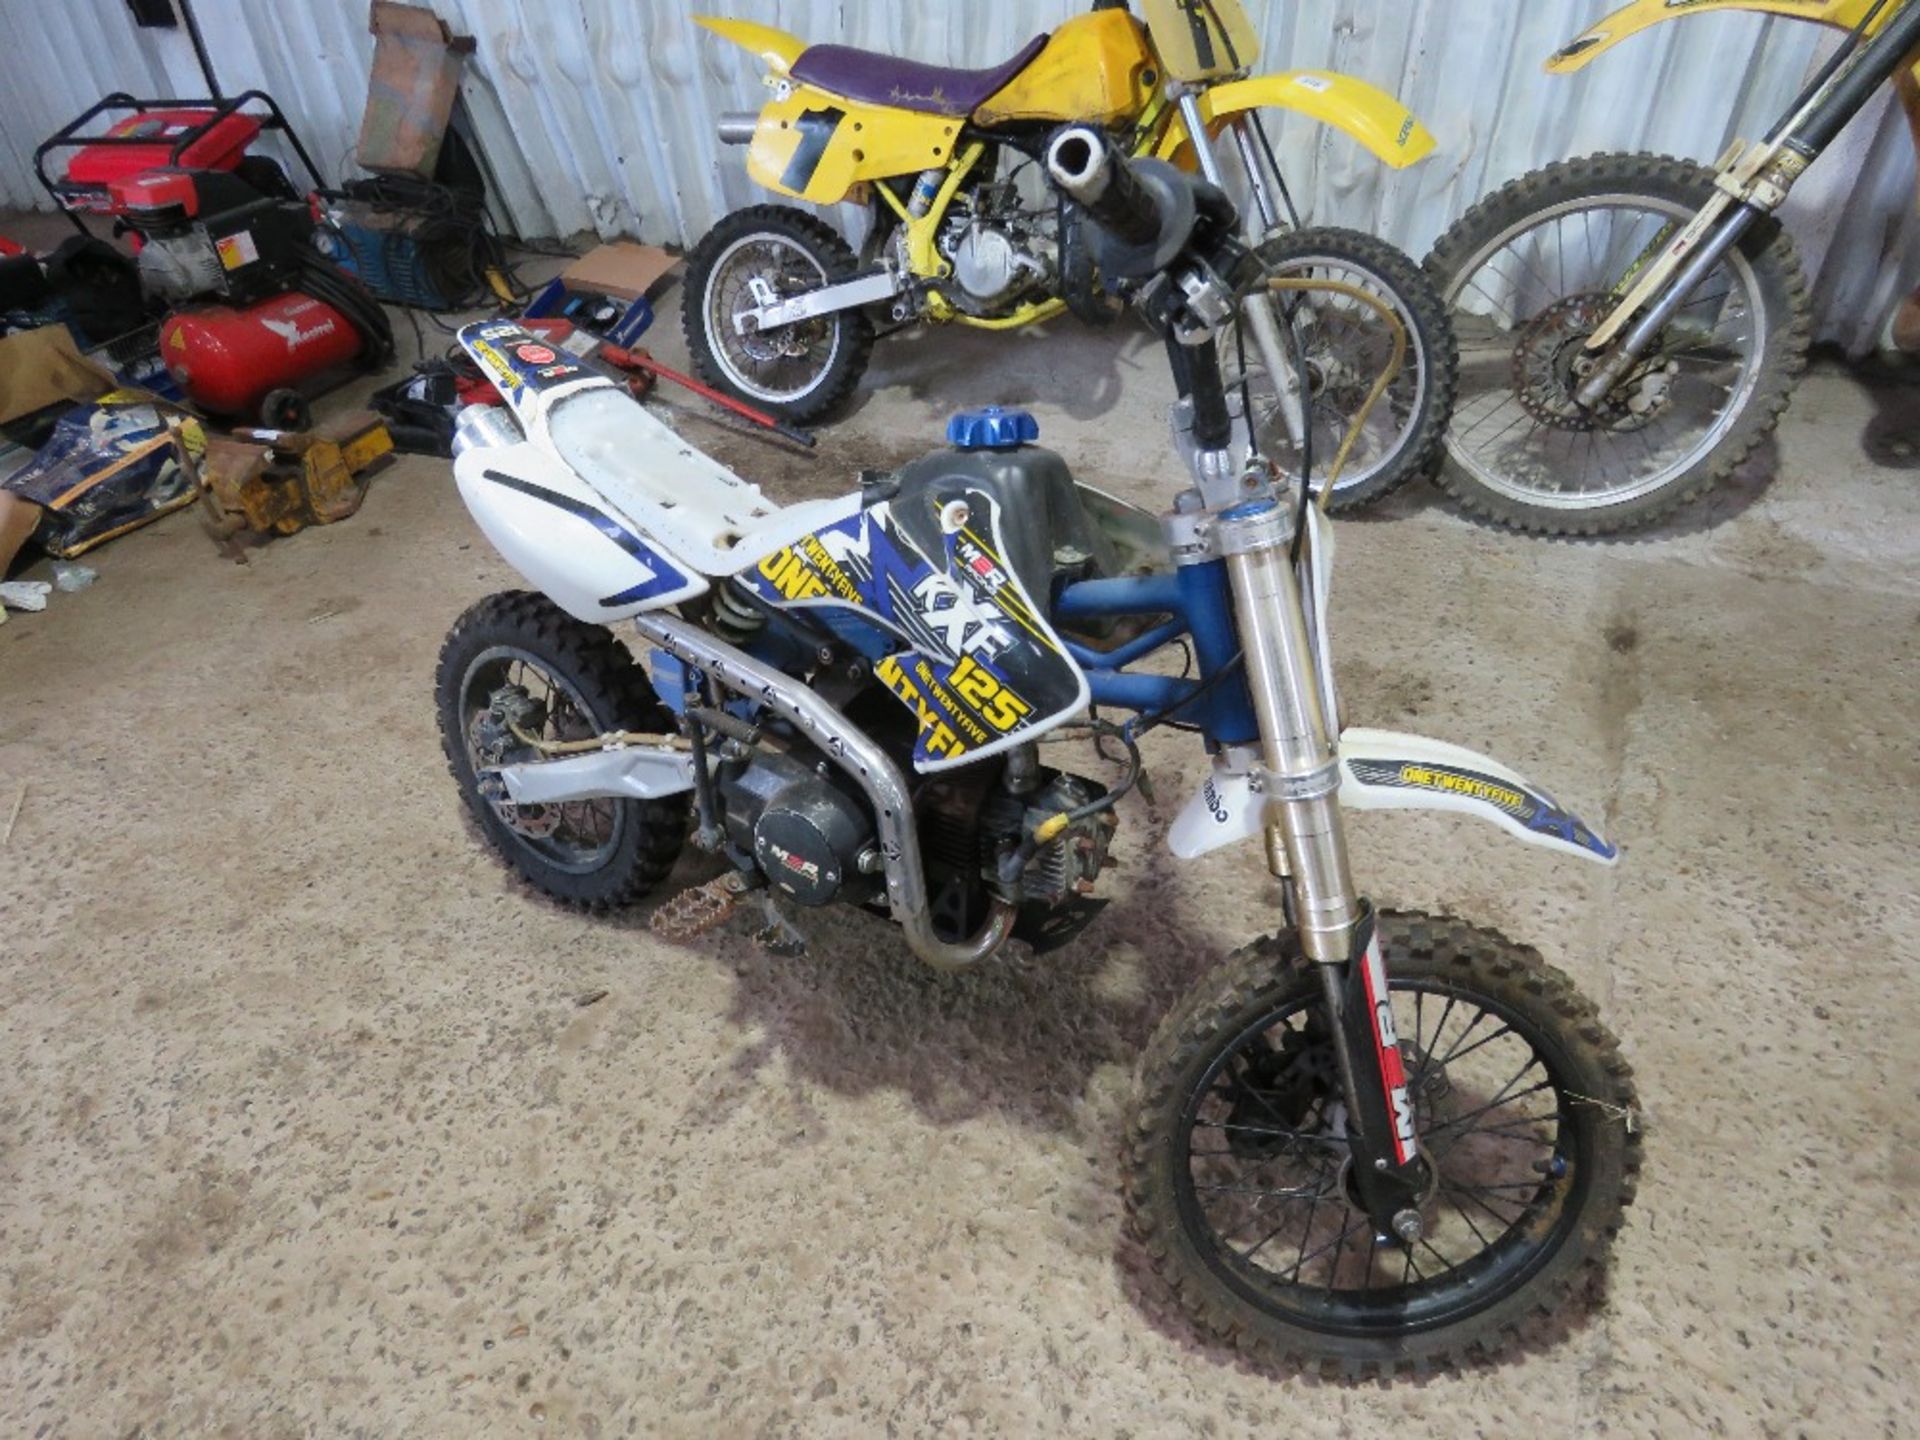 KXF125 CHILD'S SIZE MOTOCROSS TRIAL MOTORBIKE. BEEN IN STORAGE AND UNUSED FOR OVER 5 YEARS. THIS